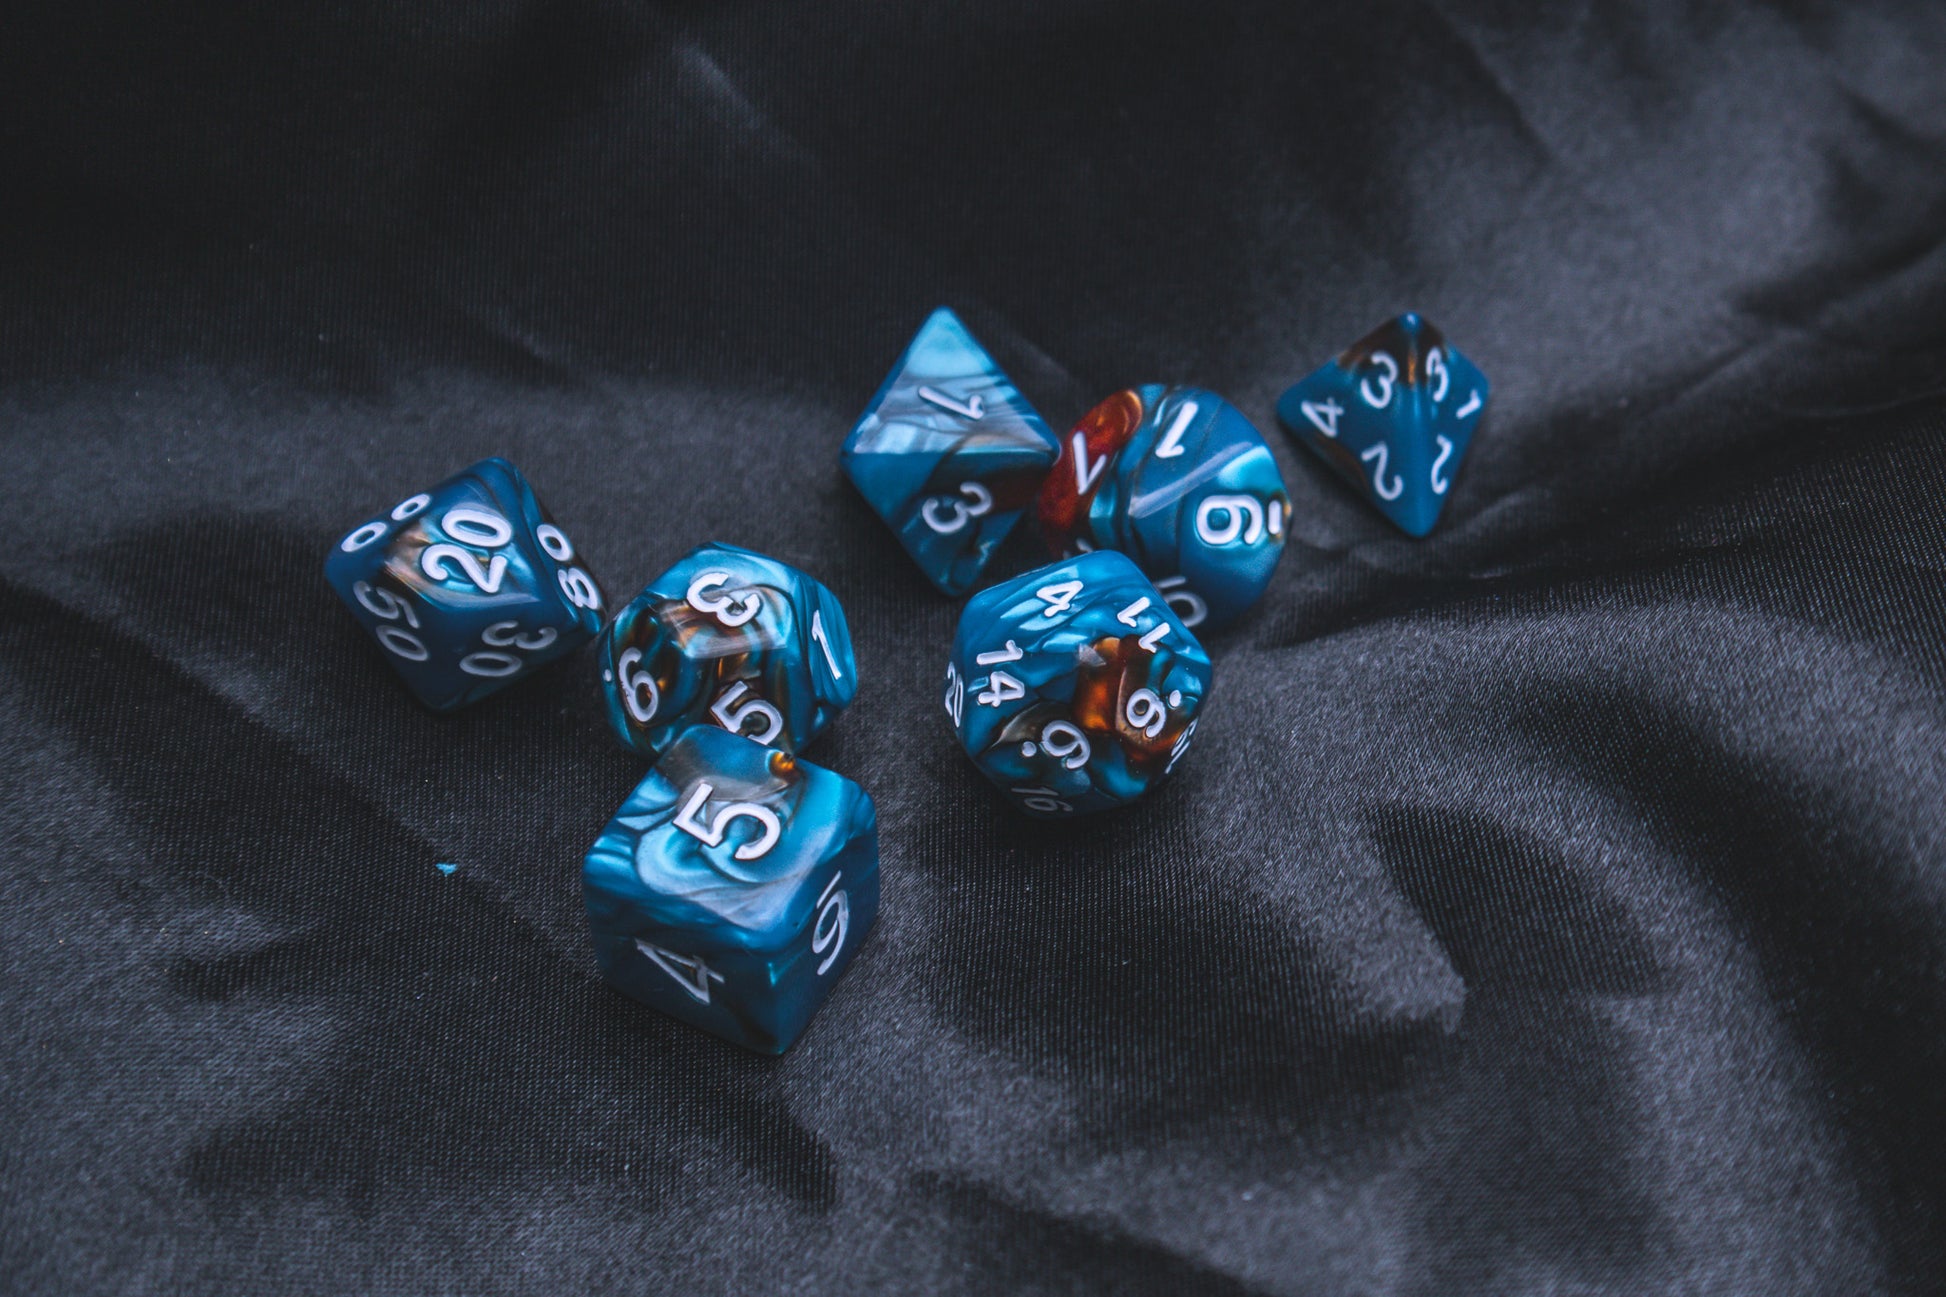 Ocean's Treasure Polyhedral dice set - Soft edge - The Flaming Feather & Flaming Filament